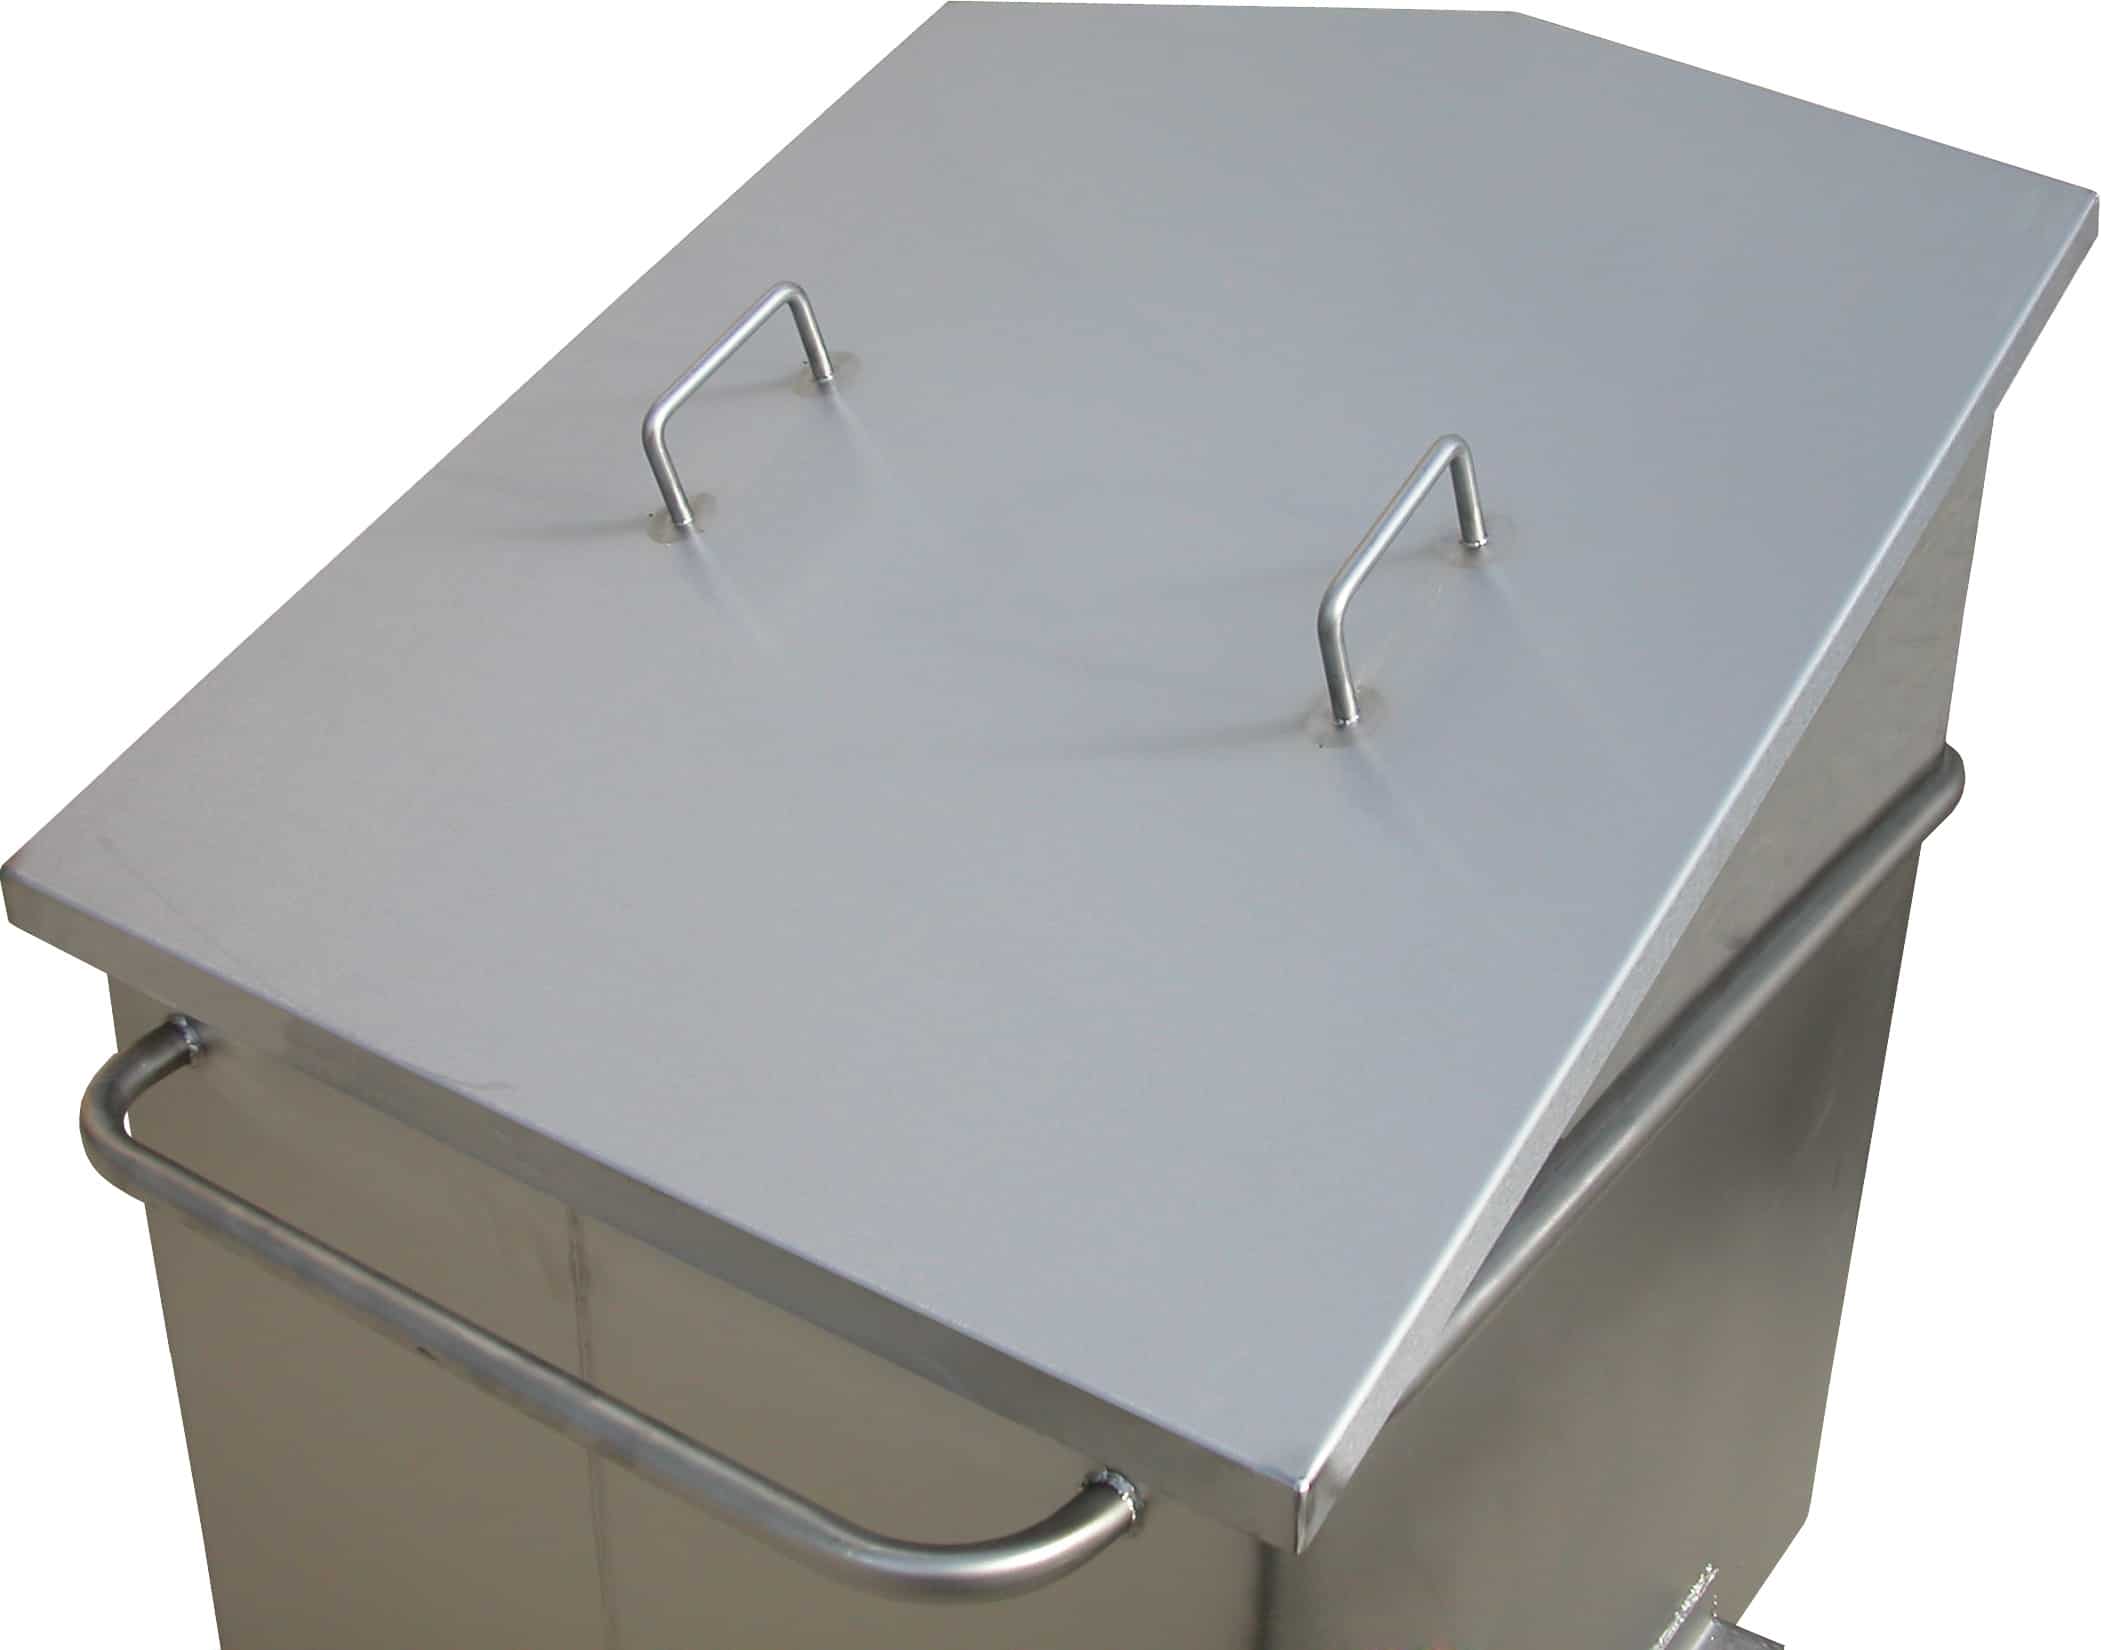 Stainless steel chuted tote bin lid